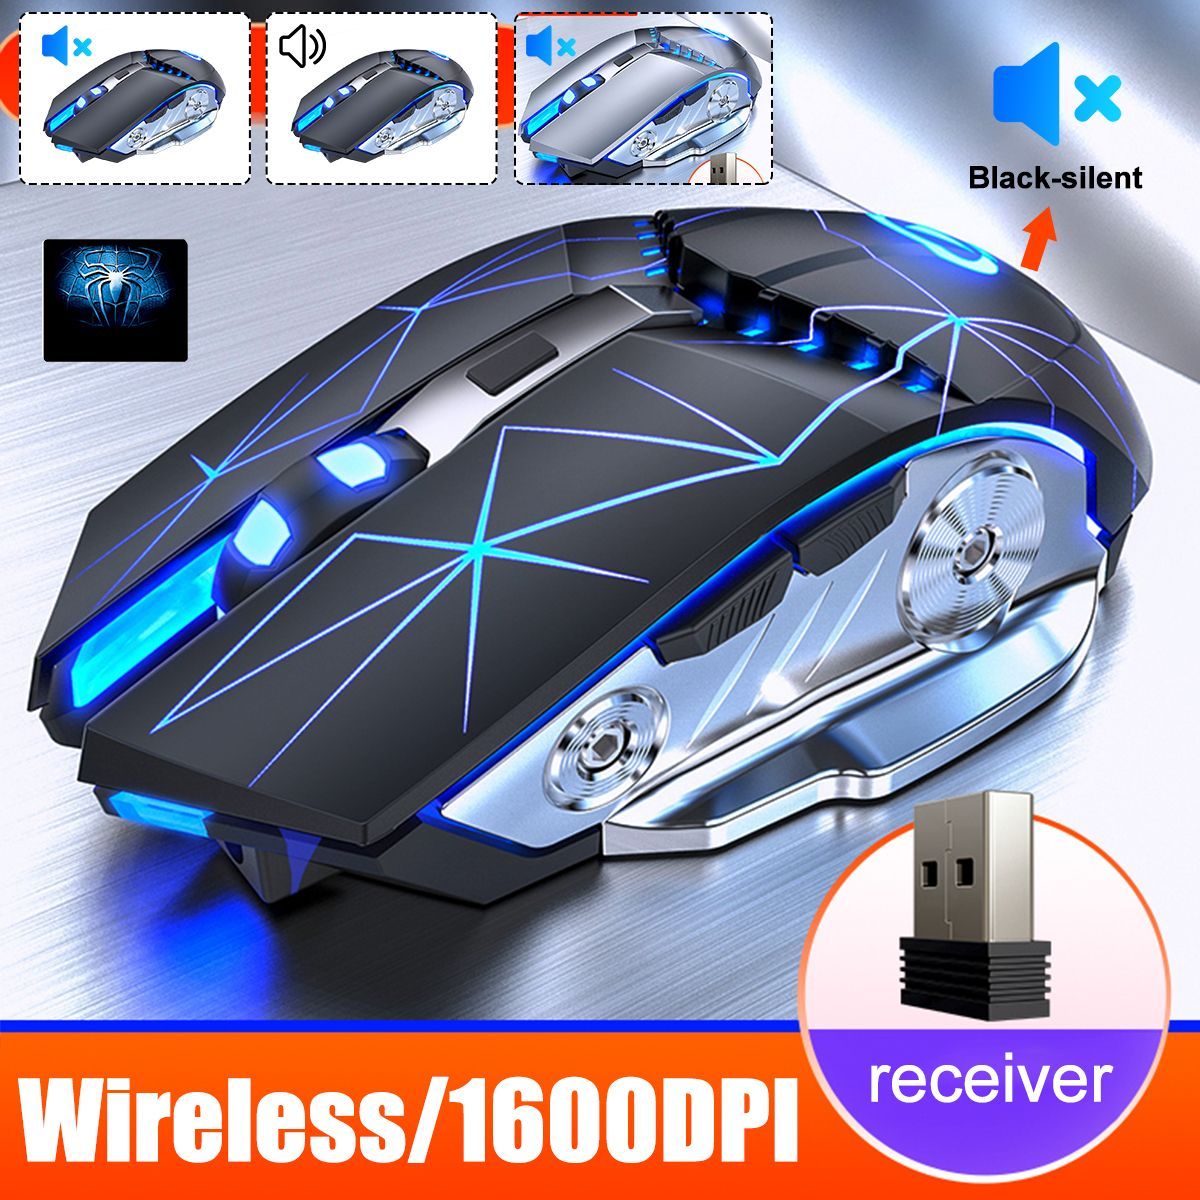 24G-Wireless-Gaming-Mouse-Sound-Silent-Rechargeable-Mouse-Blue-Backlight-With-Receiver-for-Laptop-De-1751640